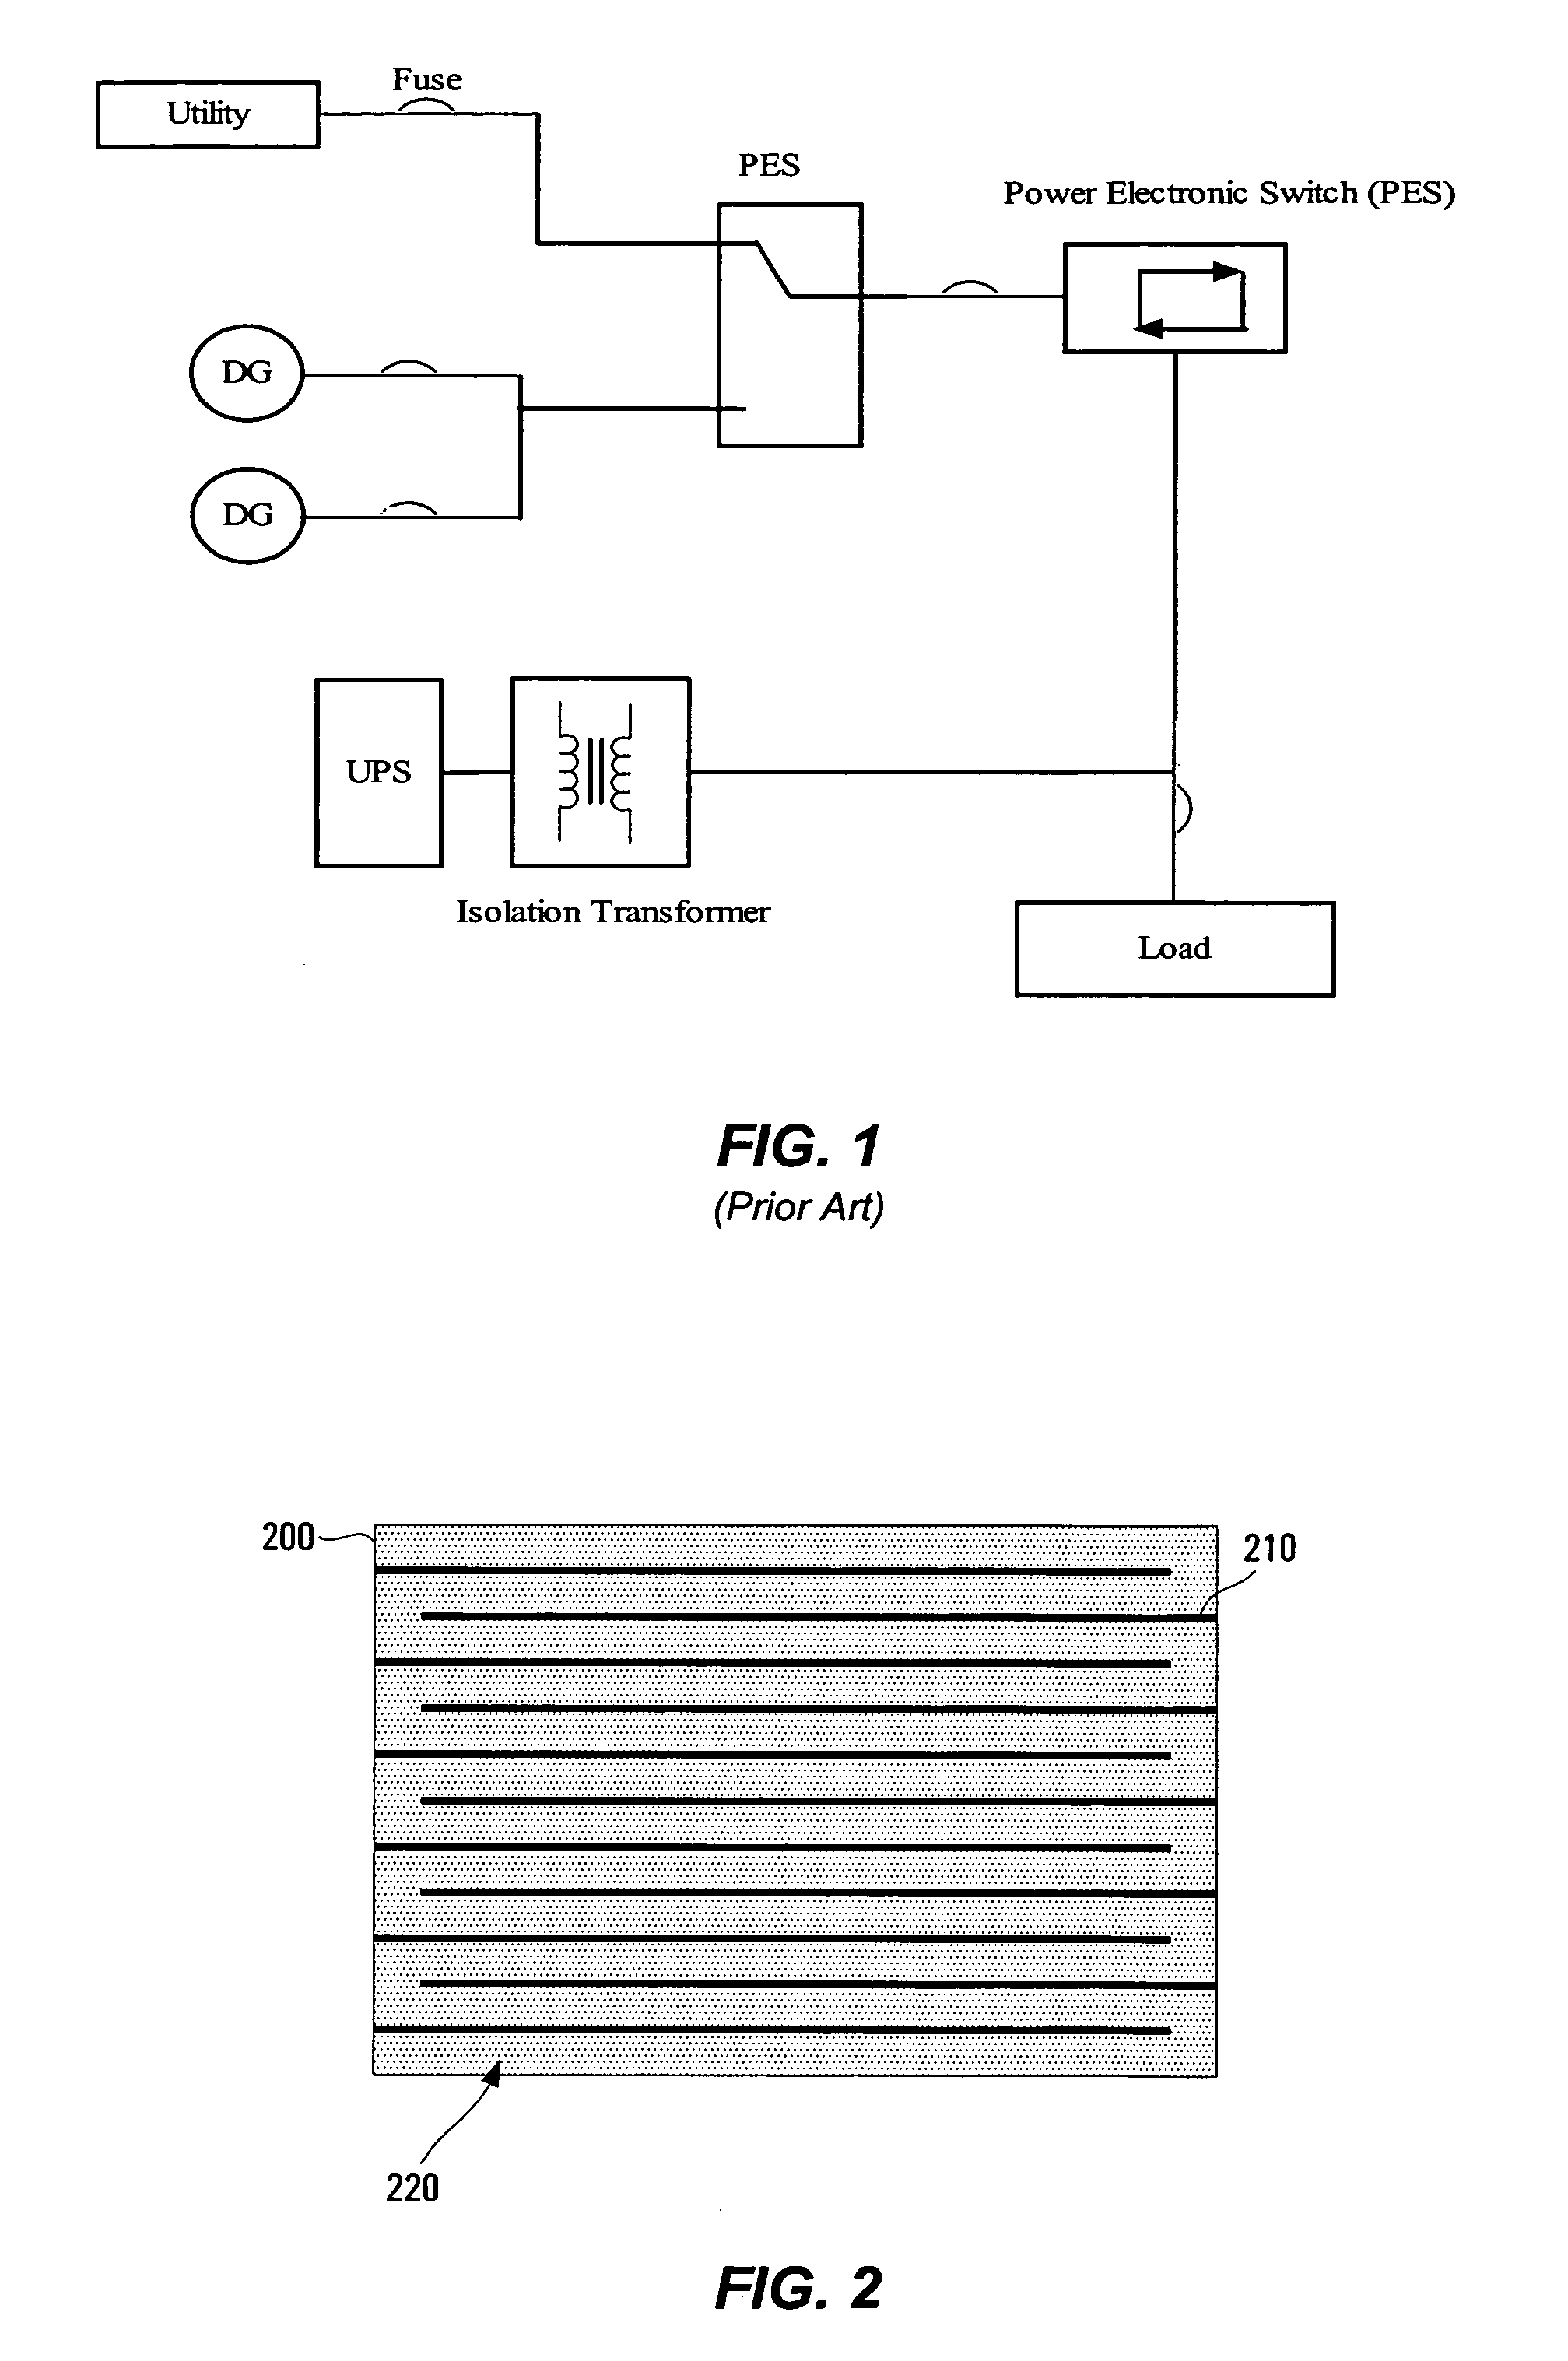 Systems and methods for utility grid power averaging, long term uninterruptible power supply, power line isolation from noise and transients and intelligent power transfer on demand